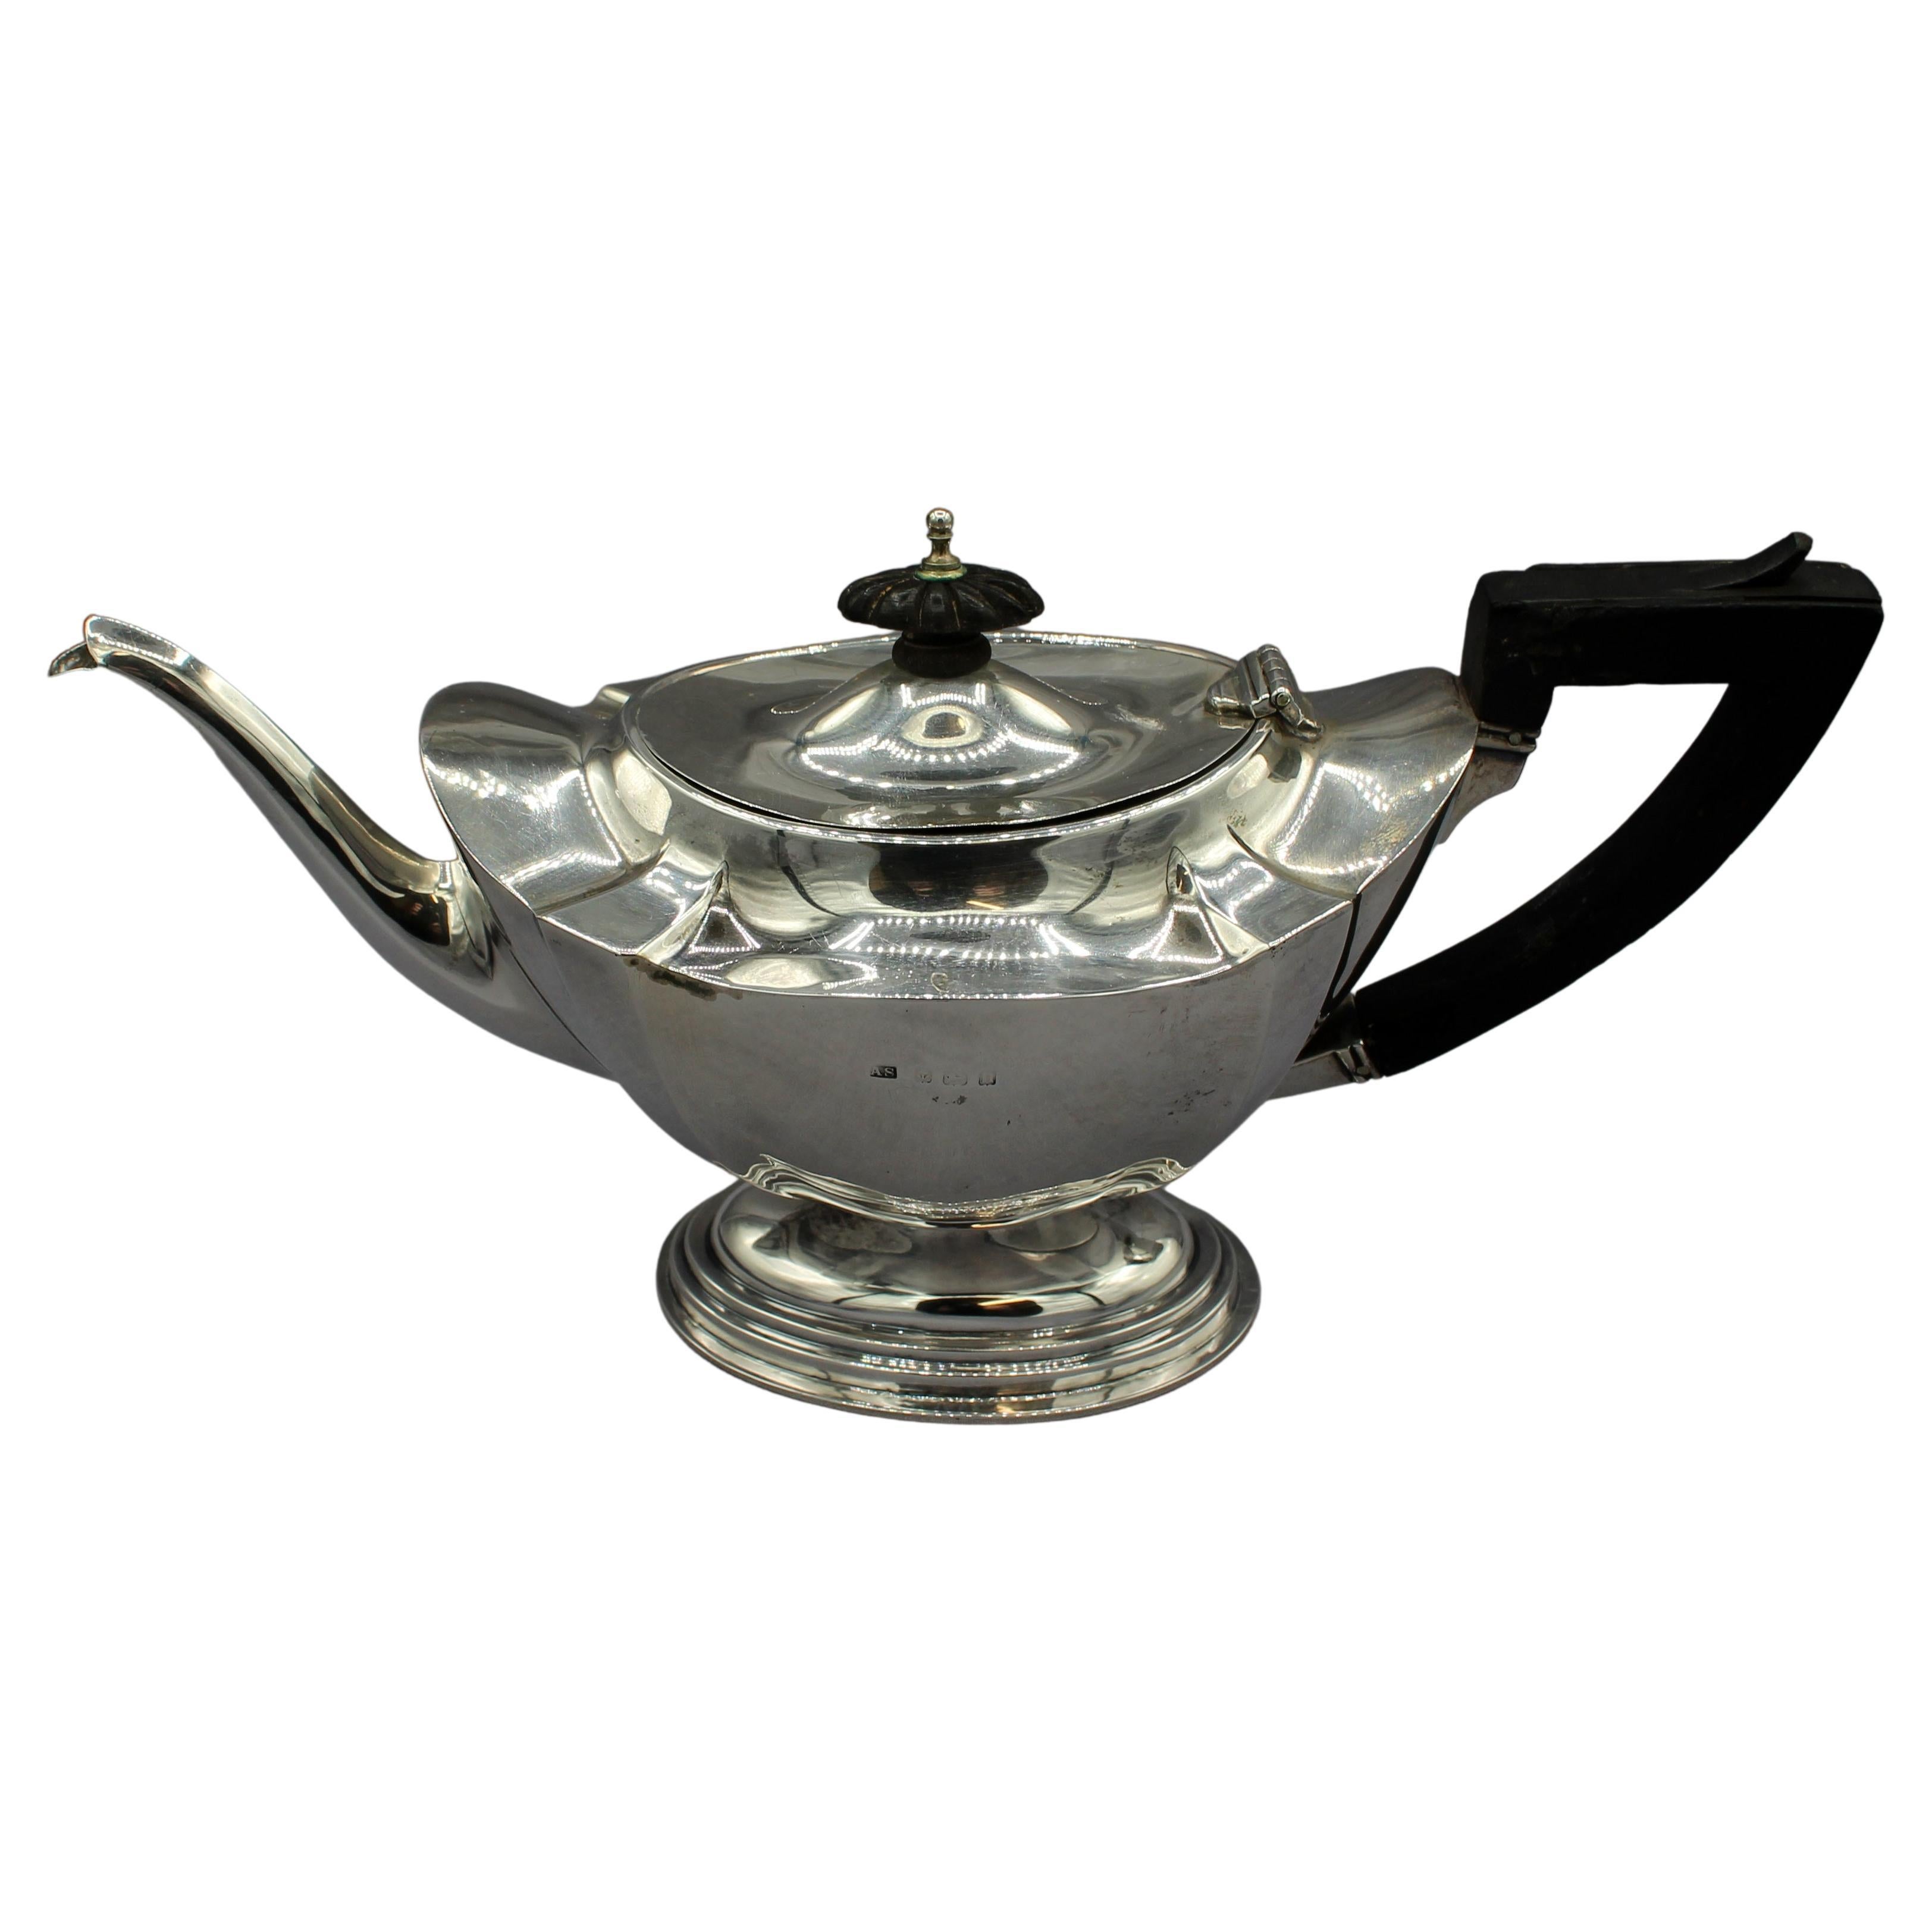 1912 English Neoclassical Revival Sterling Teapot For Sale